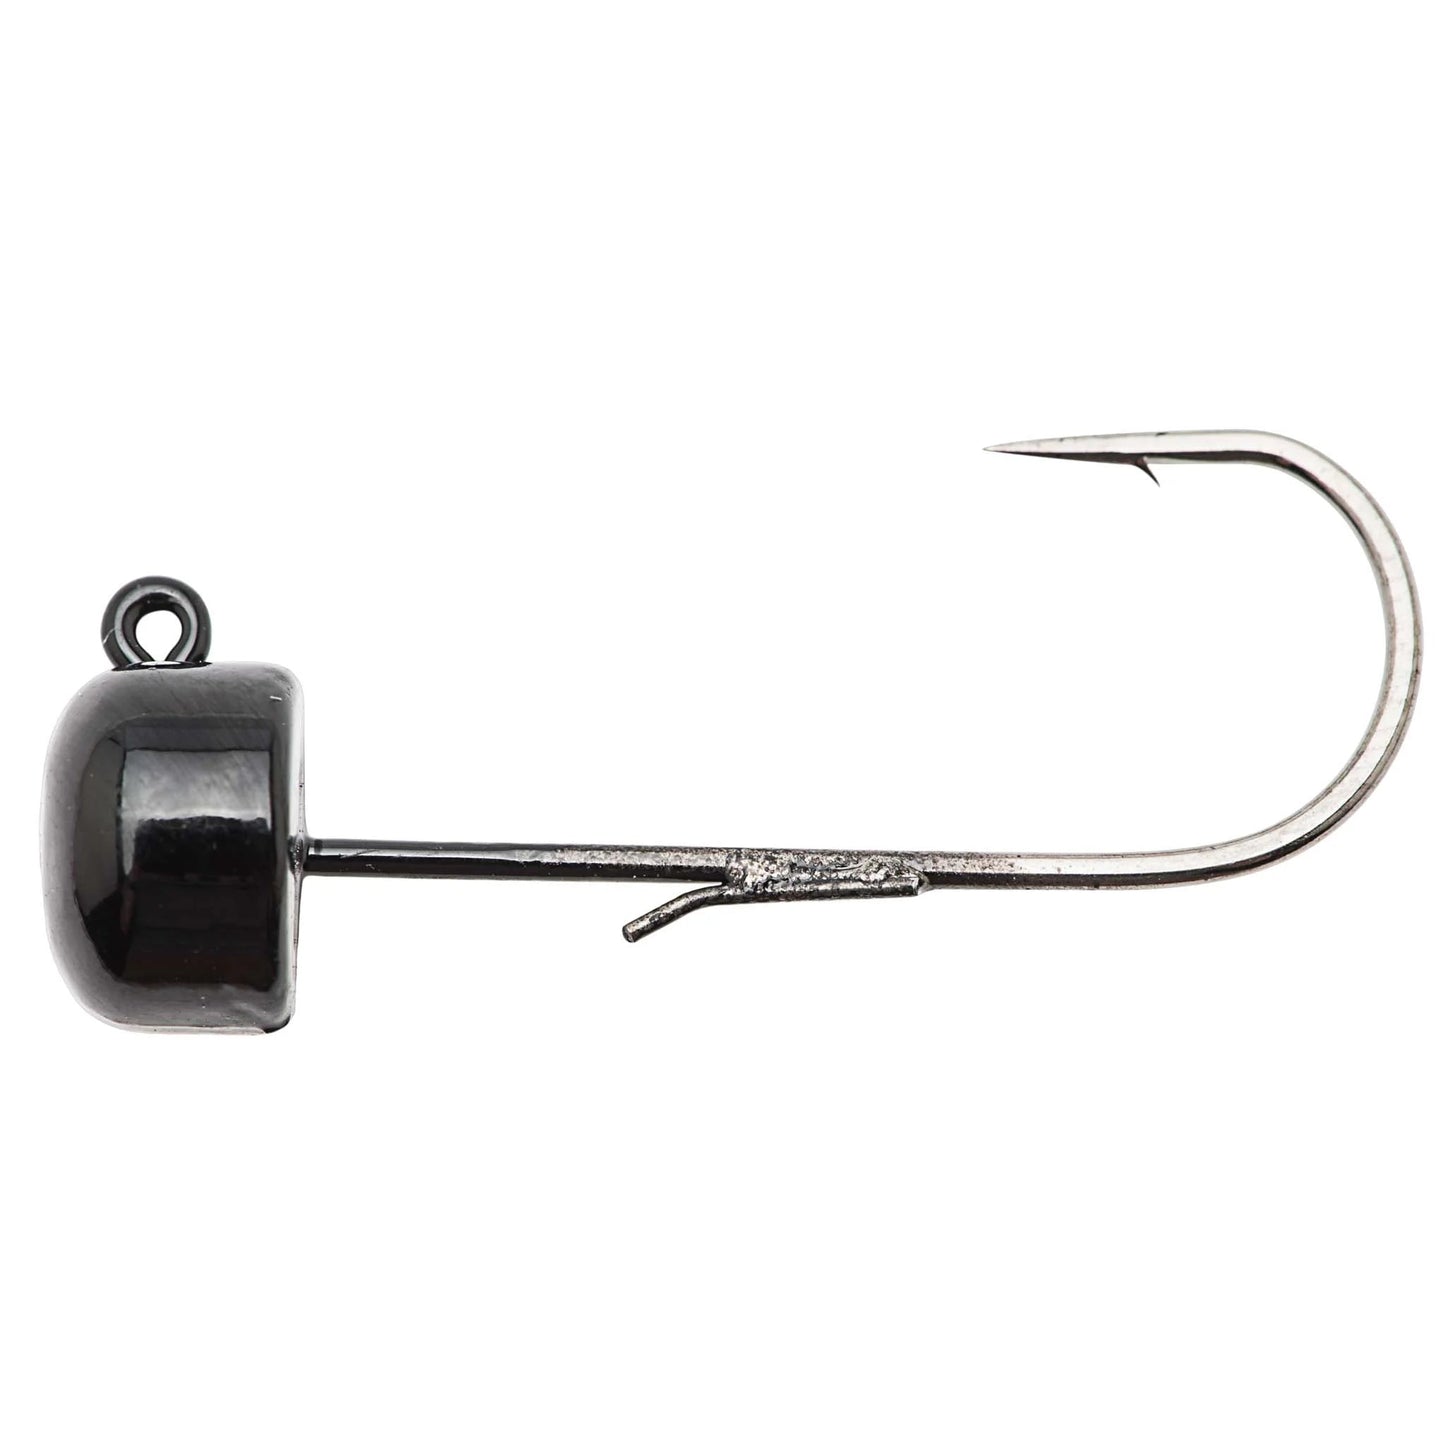 Z Man Finesse Shroomz Jig Head 5pk - Angler's Pro Tackle & Outdoors